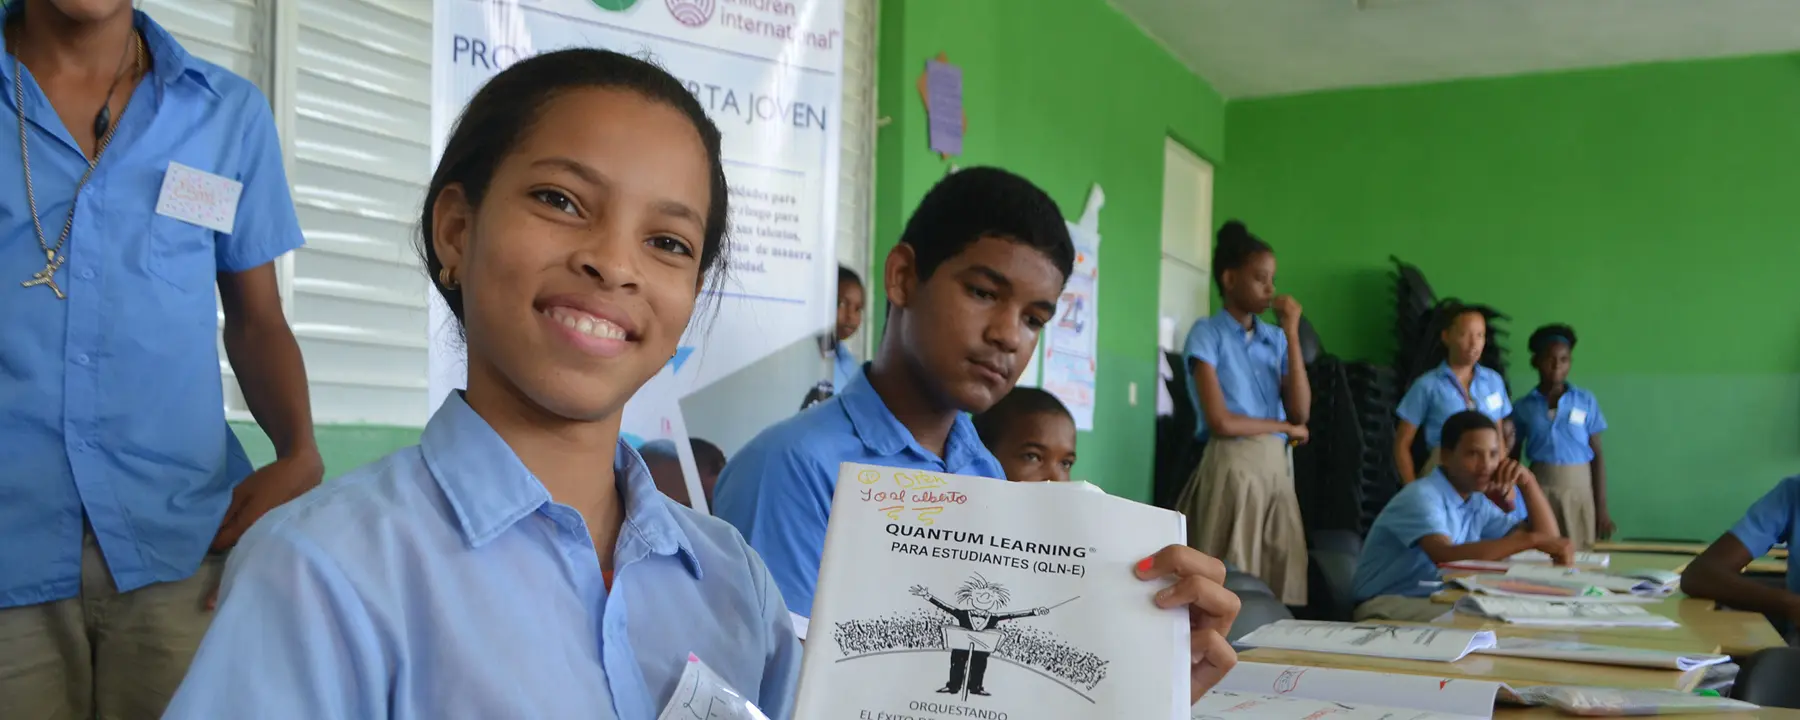 A teenage girl shows her work in an Alerta Joven academic program in the Dominican Republic.